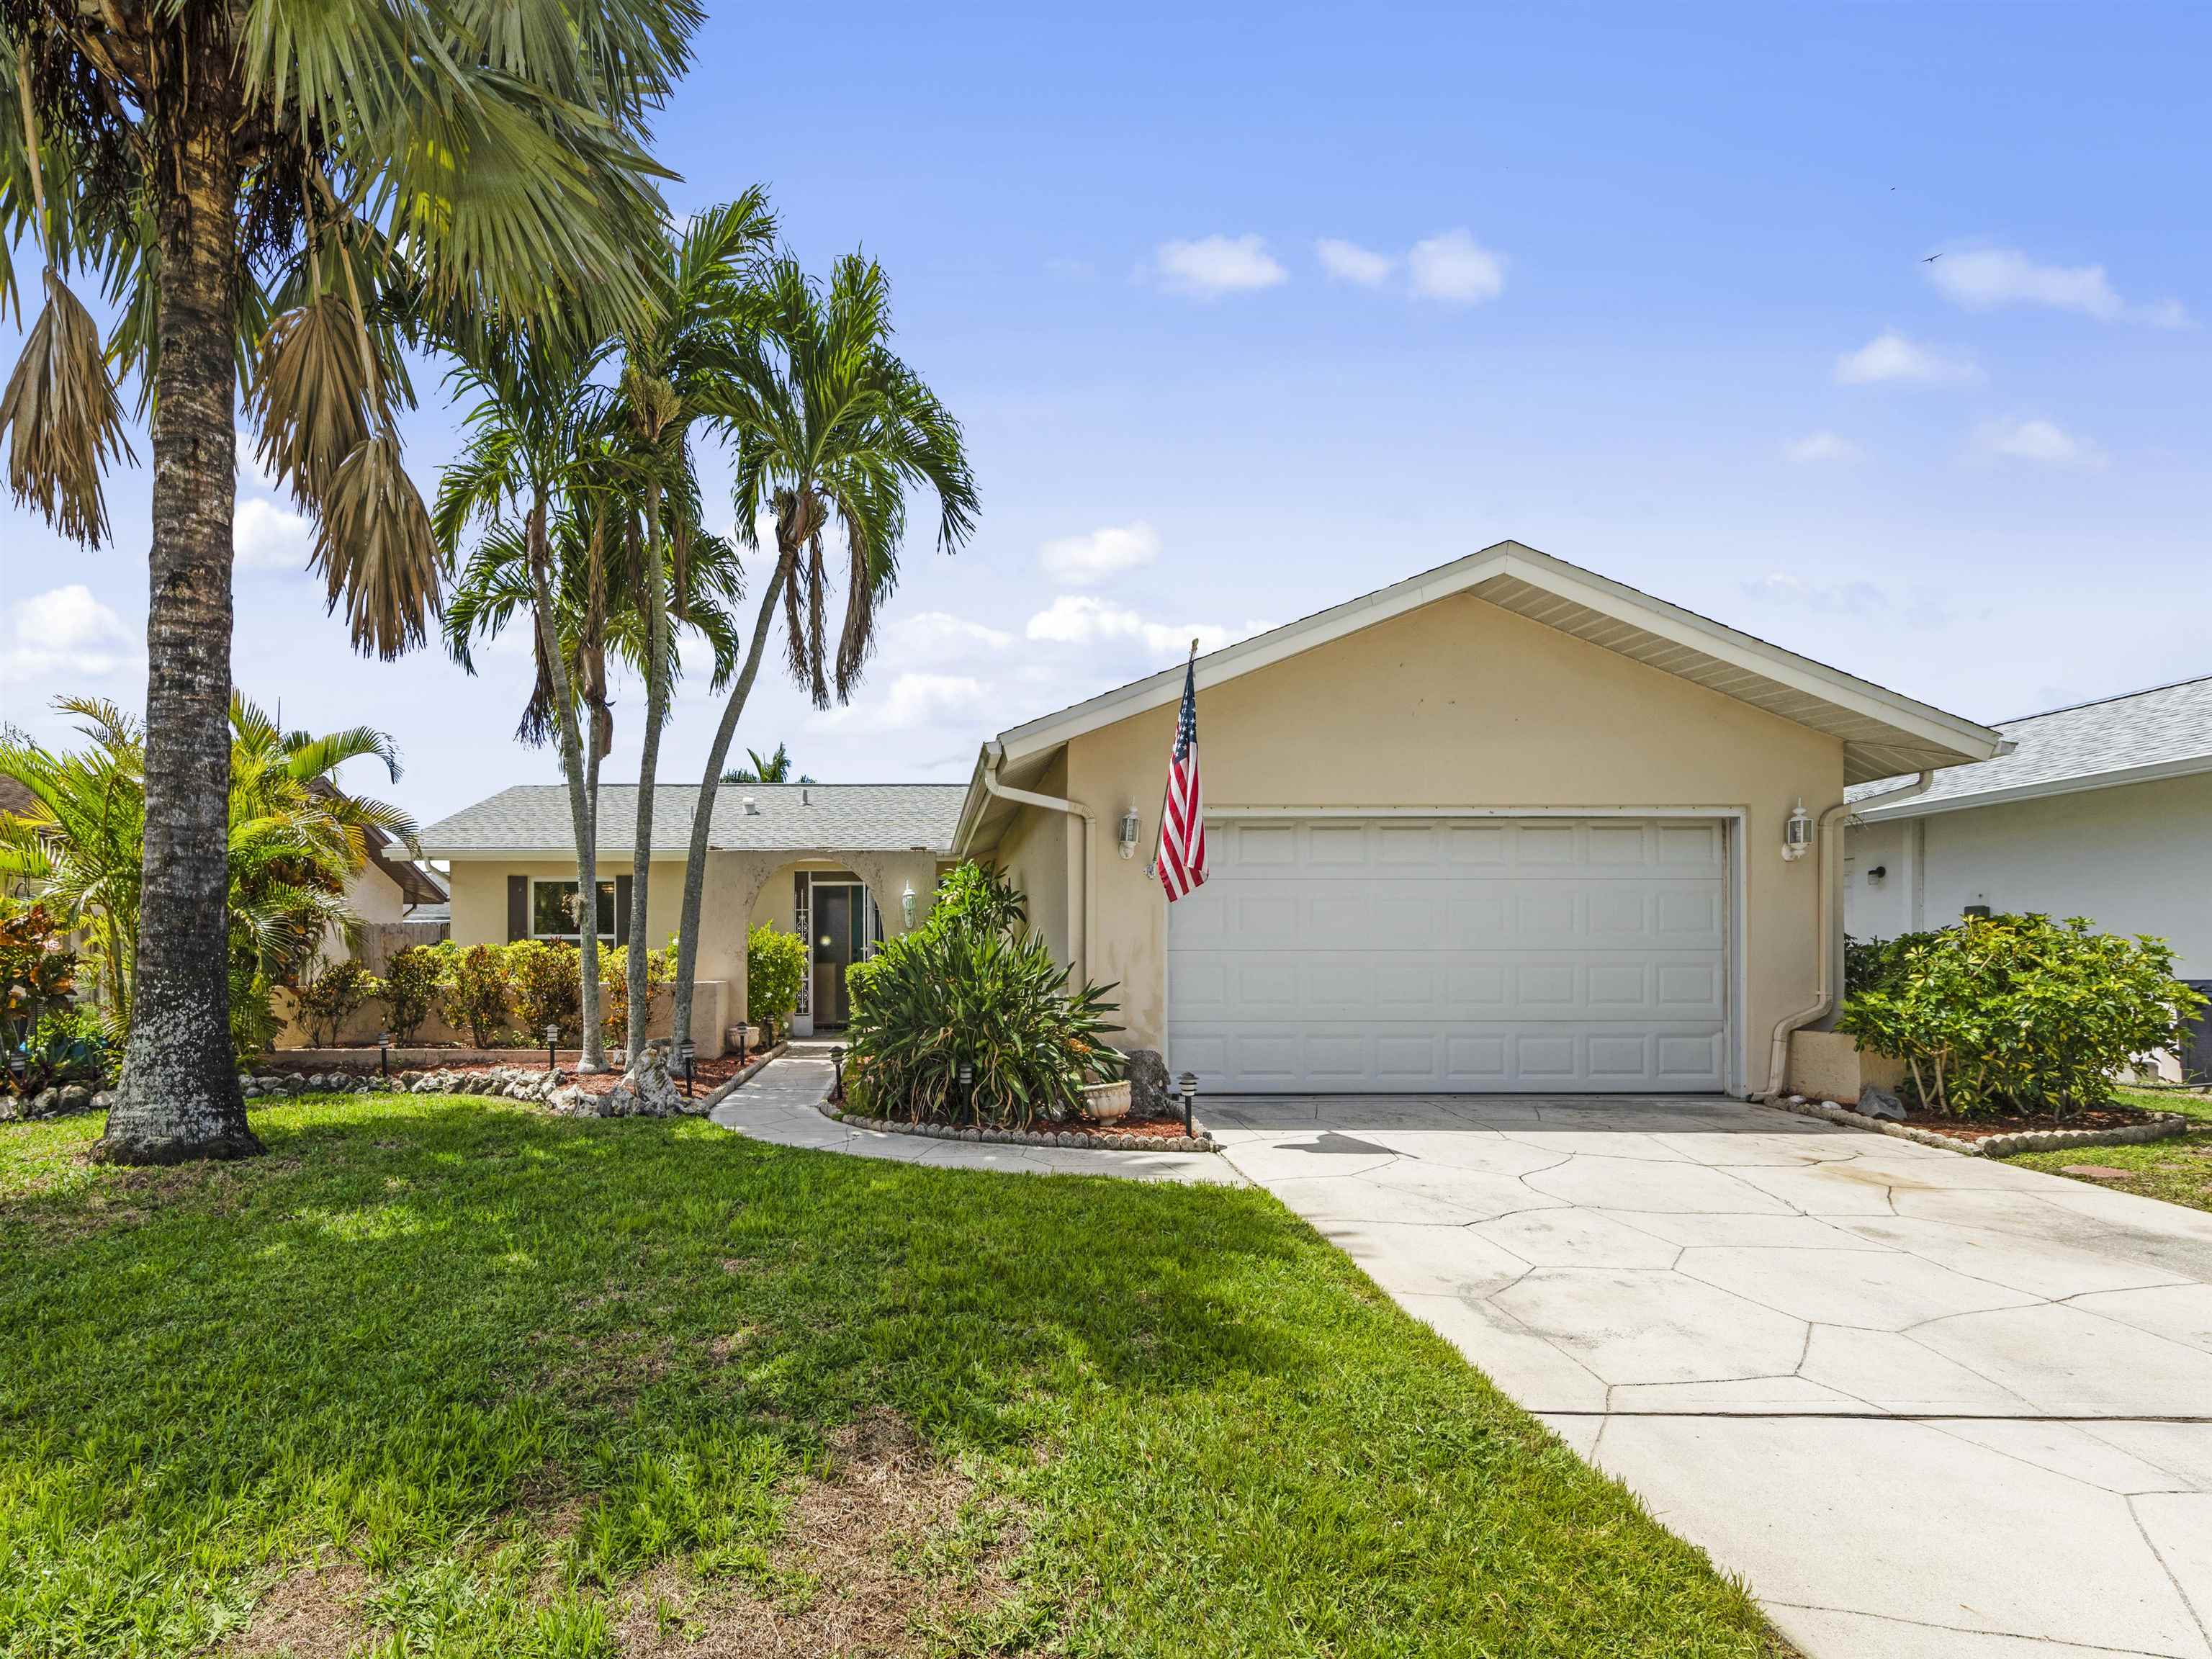 9829 Owlclover St, Fort Myers, Florida 33919, 3 Bedrooms Bedrooms, ,2 BathroomsBathrooms,Residential,For Sale,Owlclover St,2220373